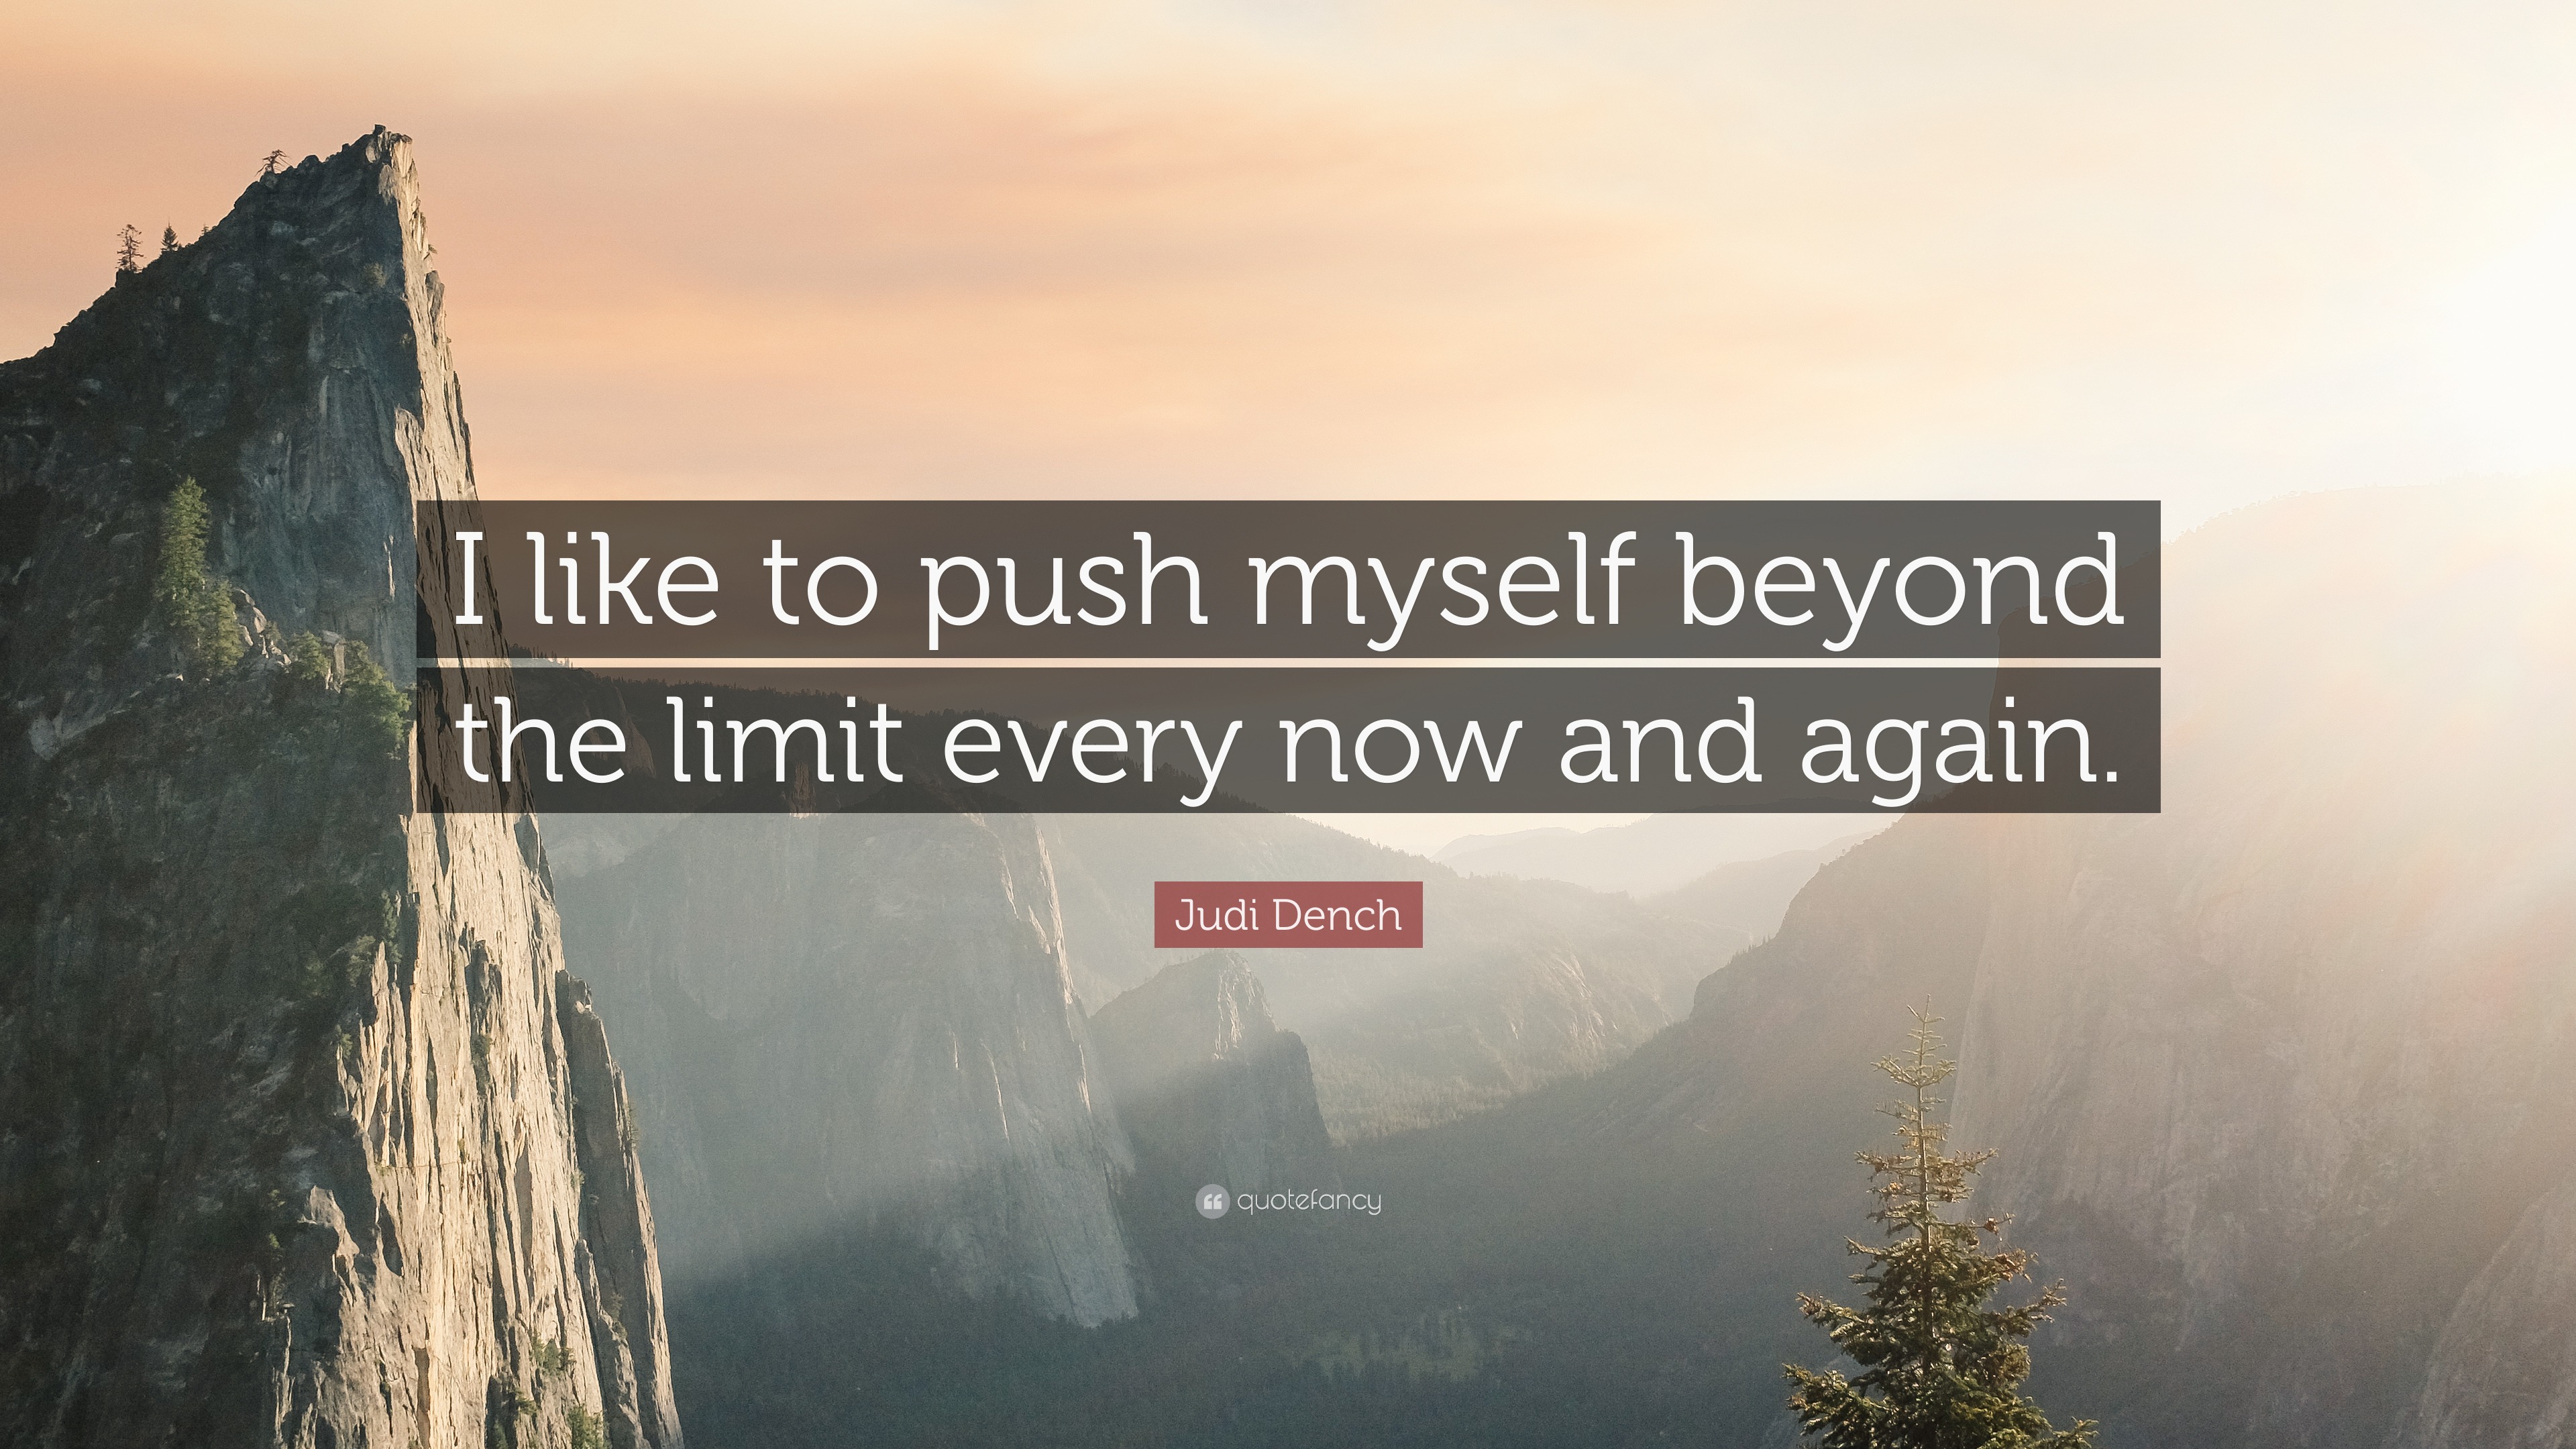 Judi Dench Quote: “I like to push myself beyond the limit every